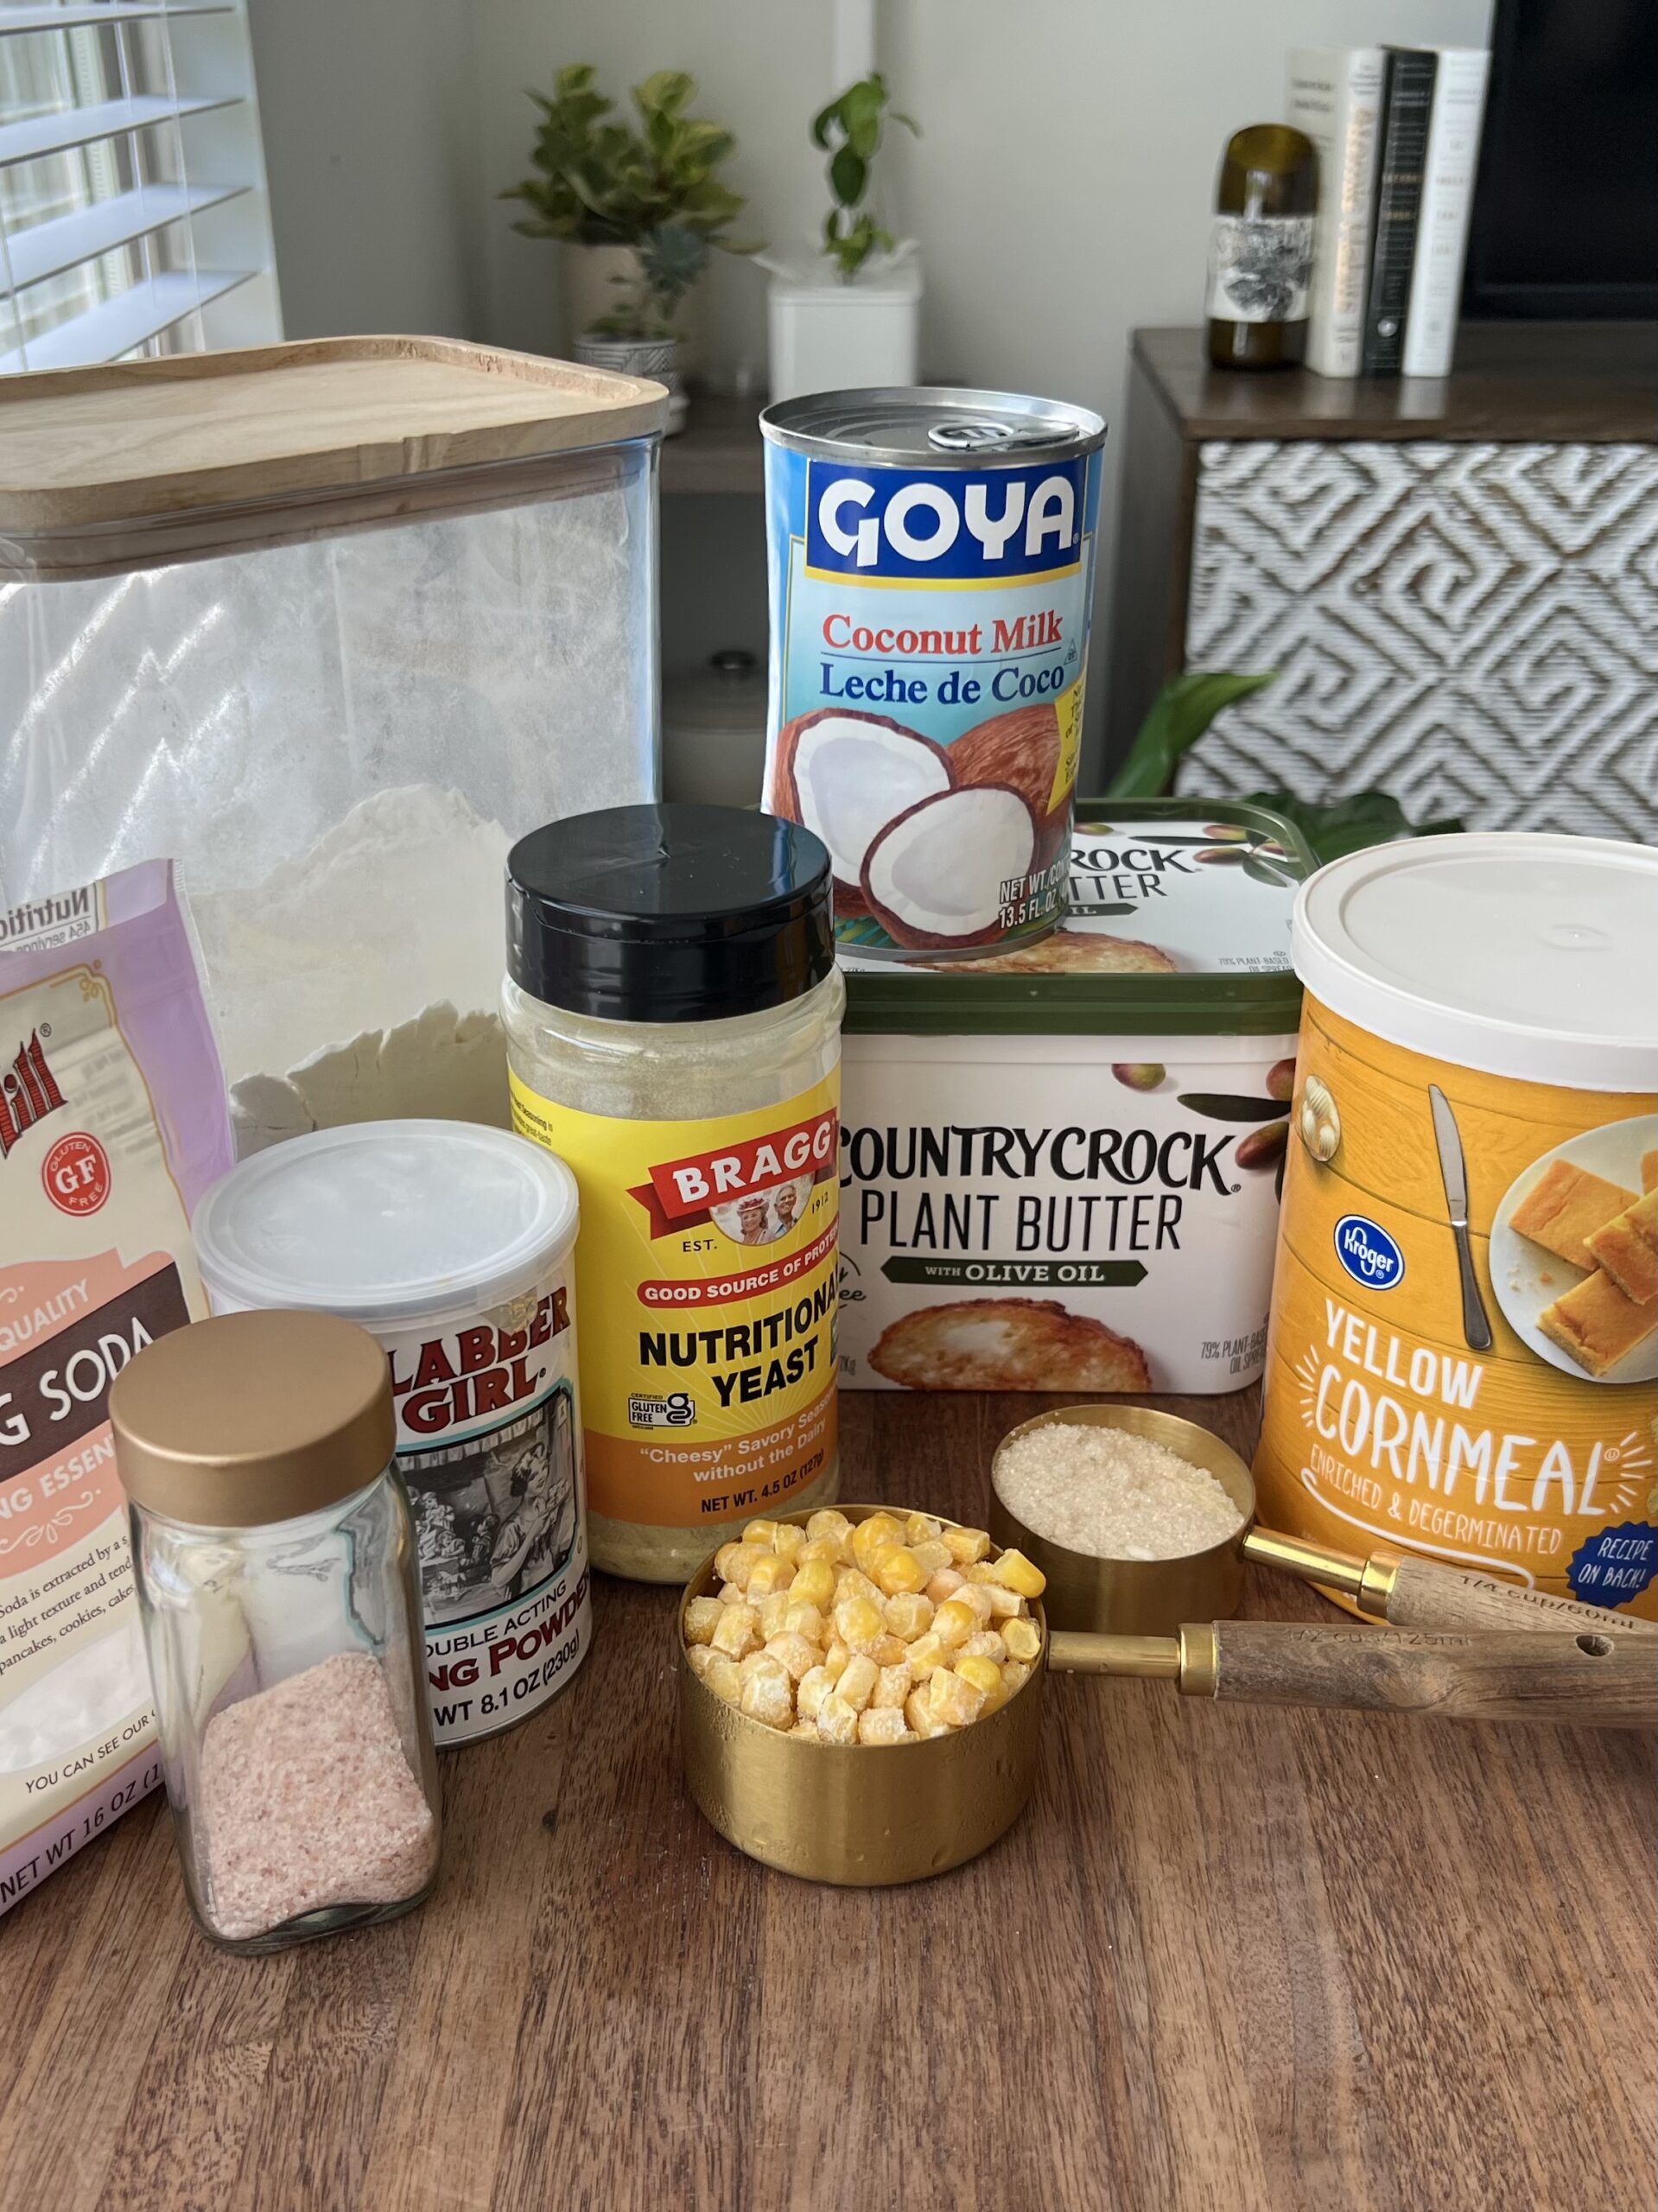 This homemade vegan cornbread can be made in one bowl and just poured into a 9x5-inch loaf pan. Hardly any mess to clean up! Photo shows the ingredients needed to make this moist vegan cornrbead.